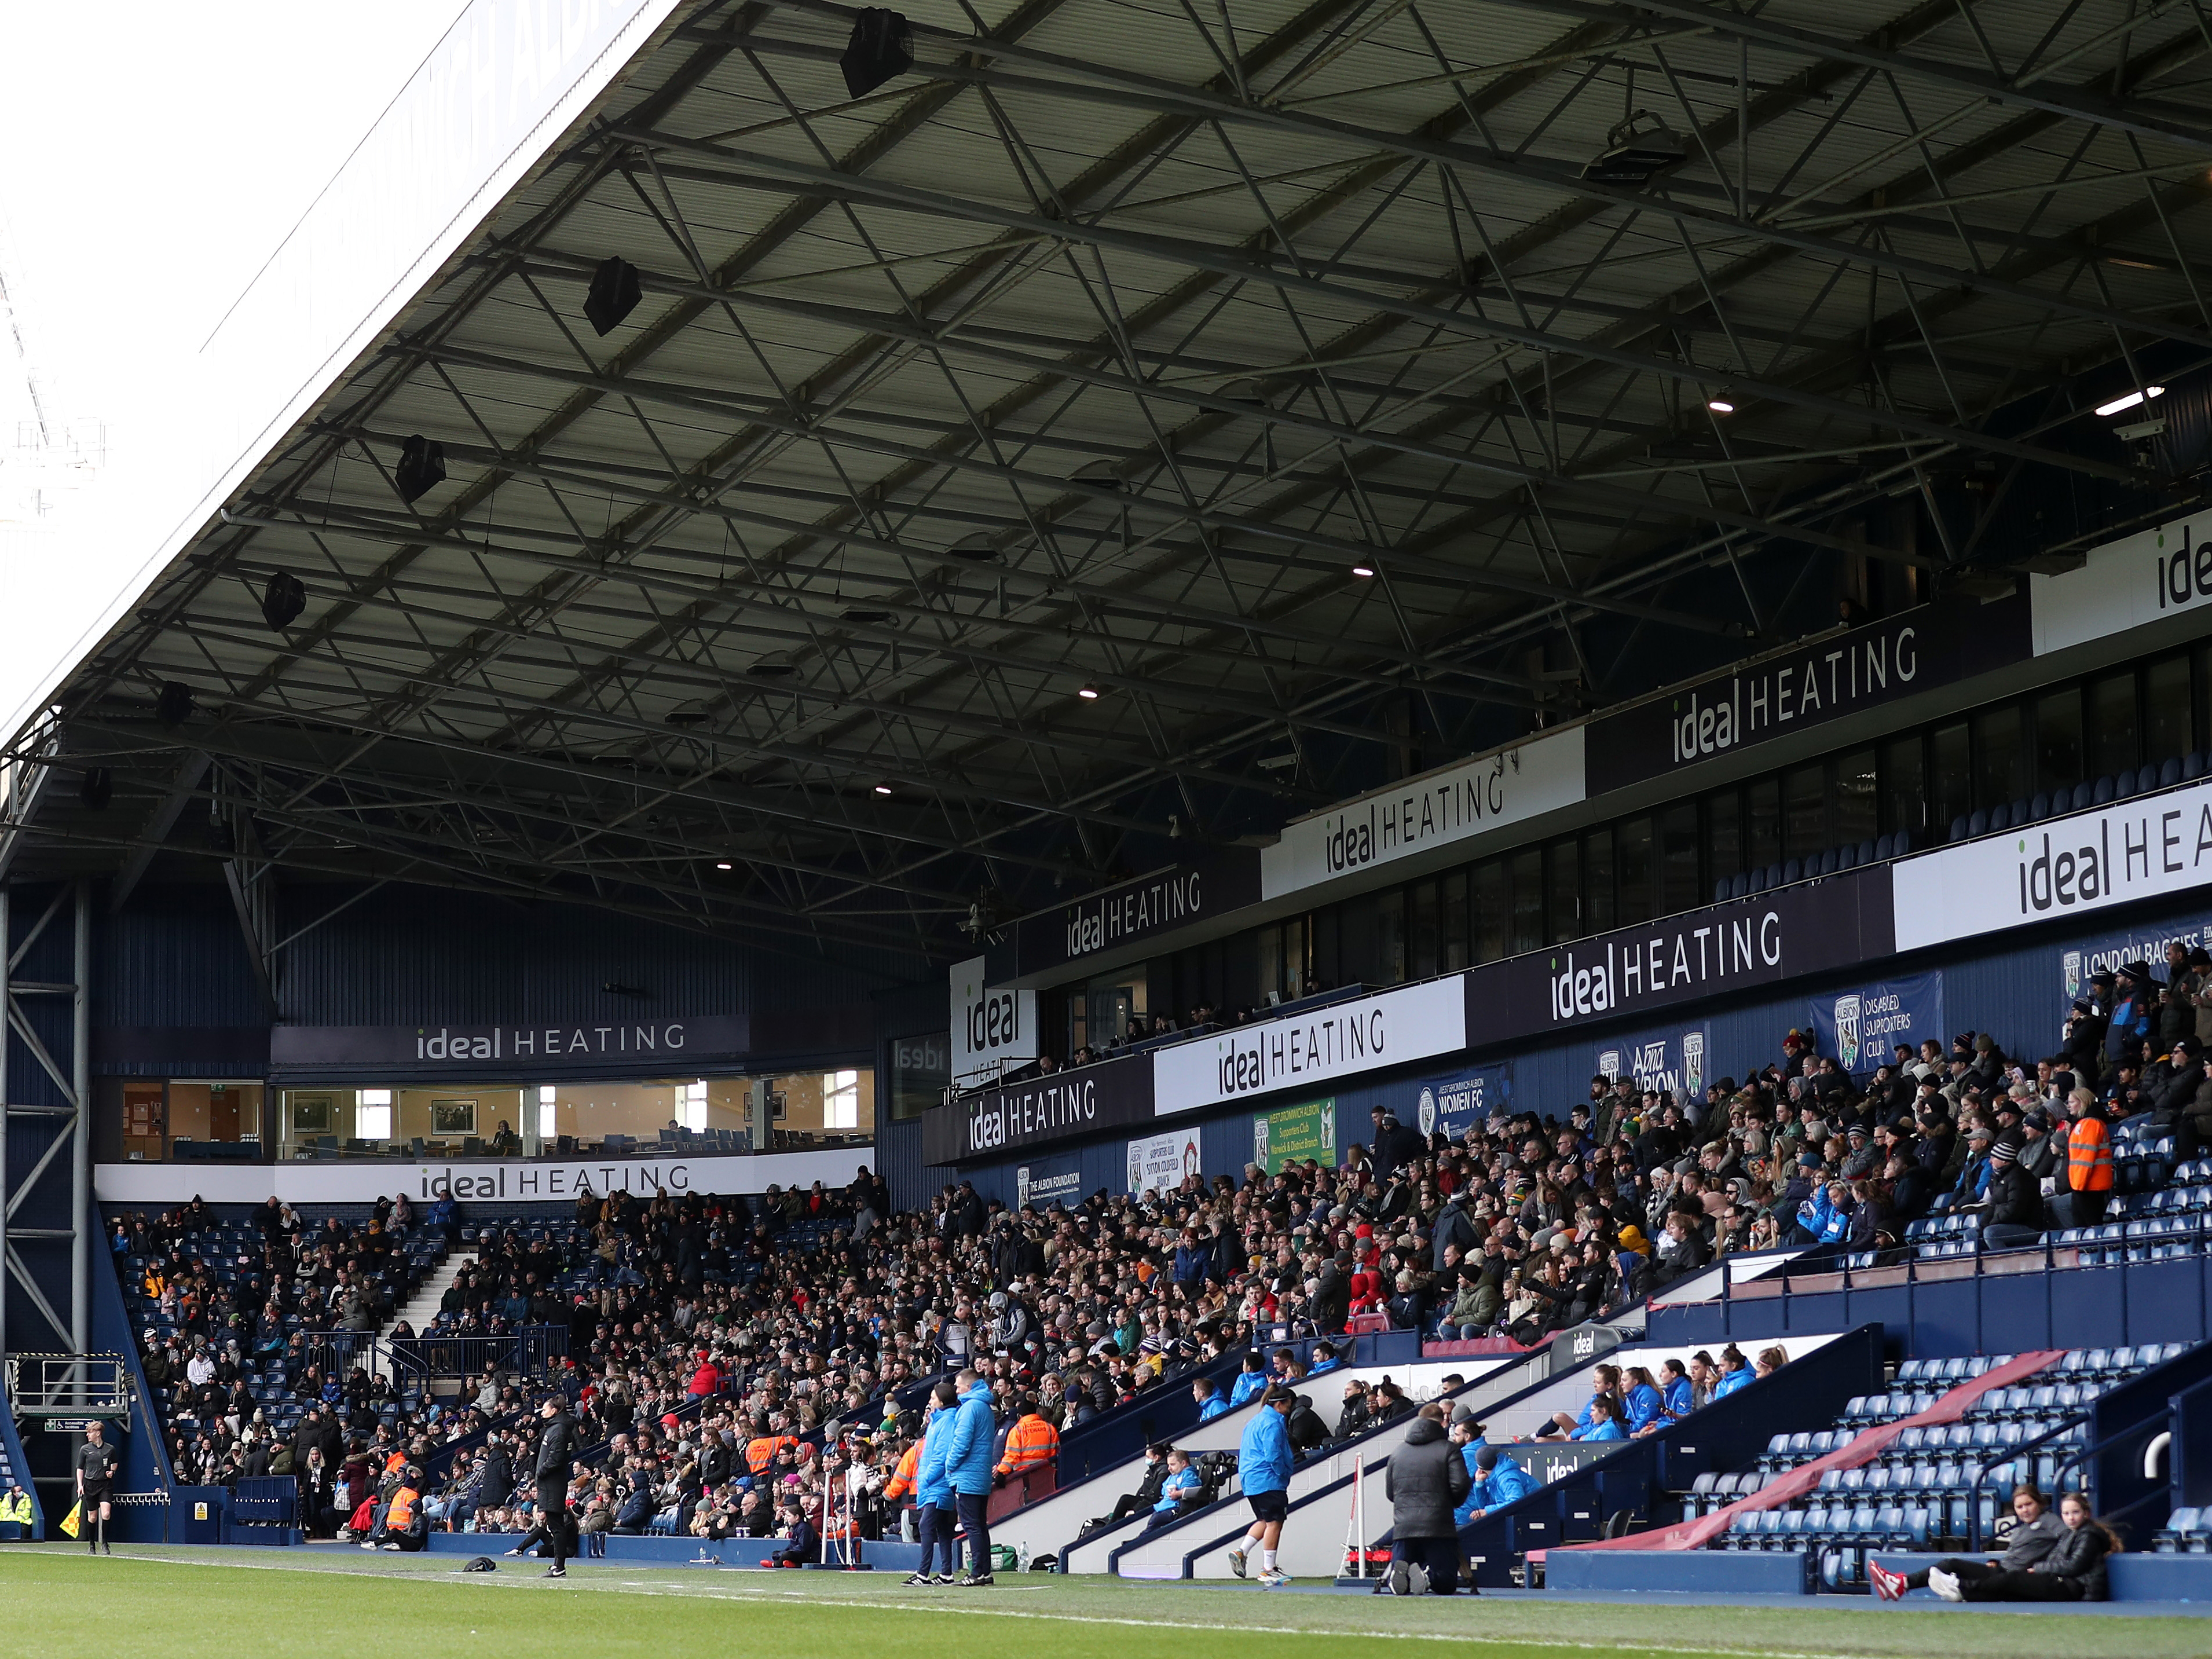 Albion Women marked their first-ever game at The Hawthorns with a win on Sunday afternoon – beating Derby County 2-0 in front of 1,871 supporters